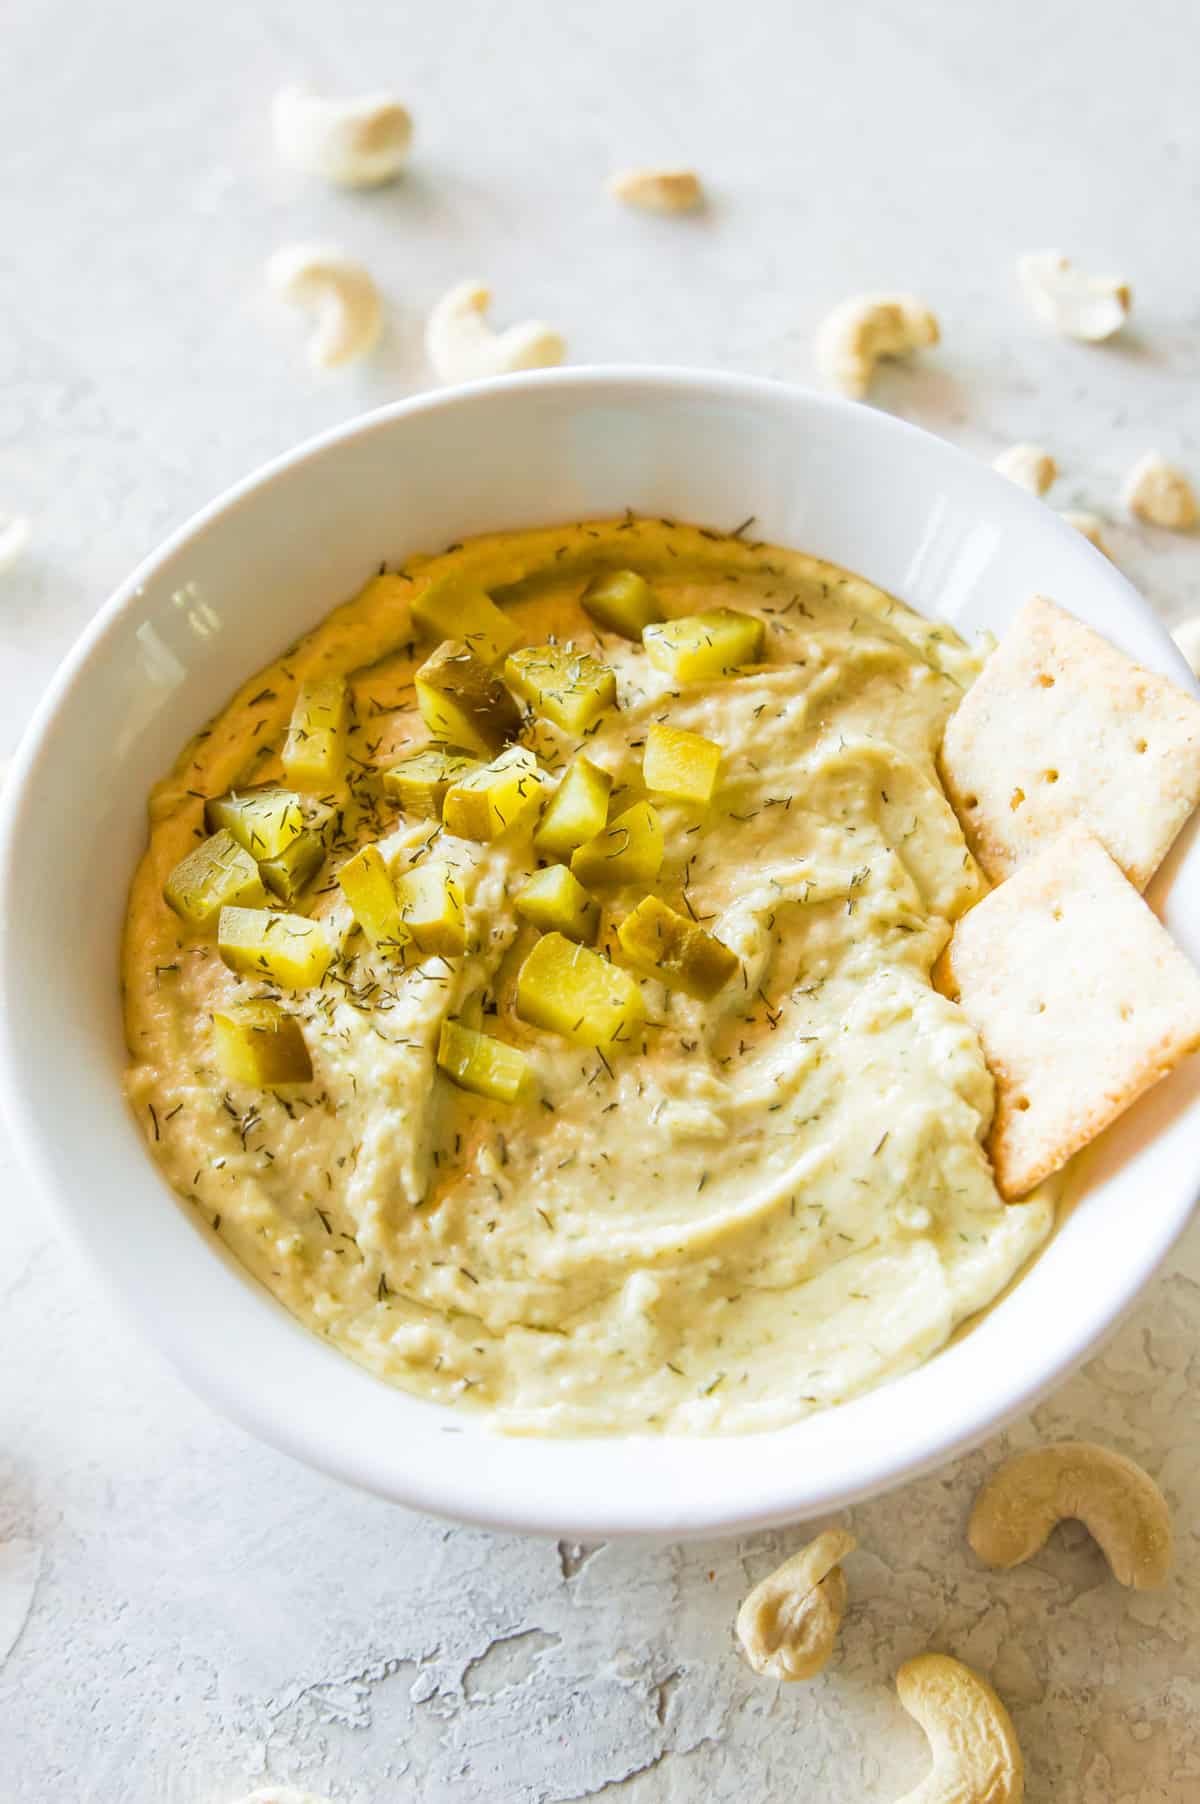 A bowl of dill pickle dip topped with chopped dill pickles, fresh dill and with two crackers in it.